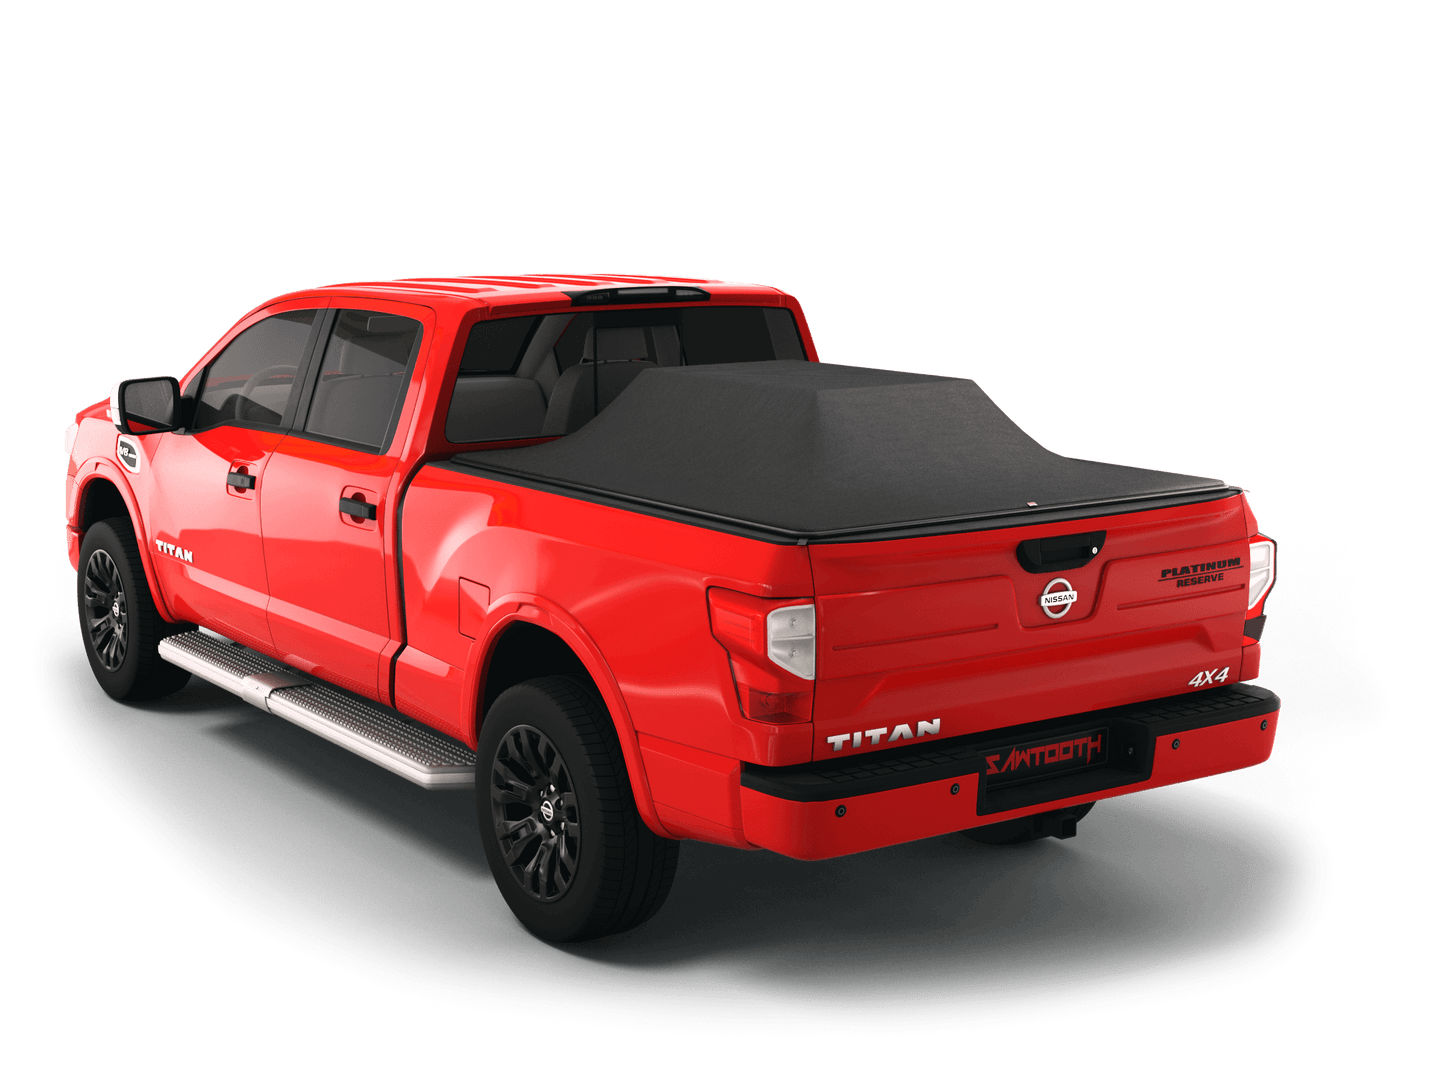 Red Nissan Titan with gear in the truck bed and the Sawtooth Stretch tonneau cover expanded over cargo load